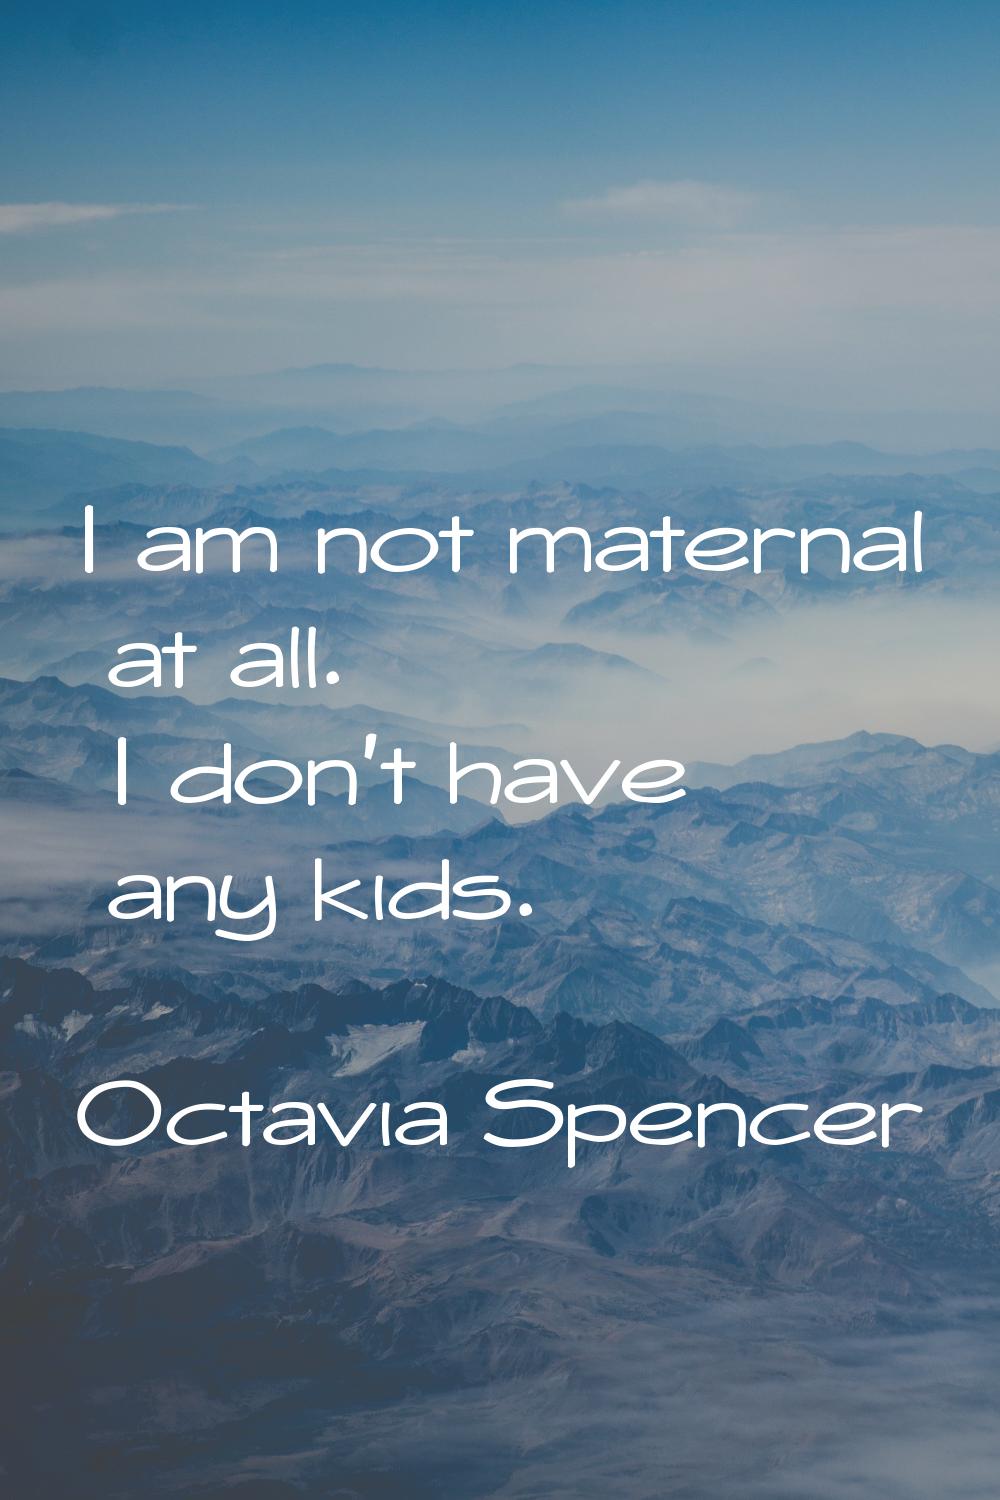 I am not maternal at all. I don't have any kids.